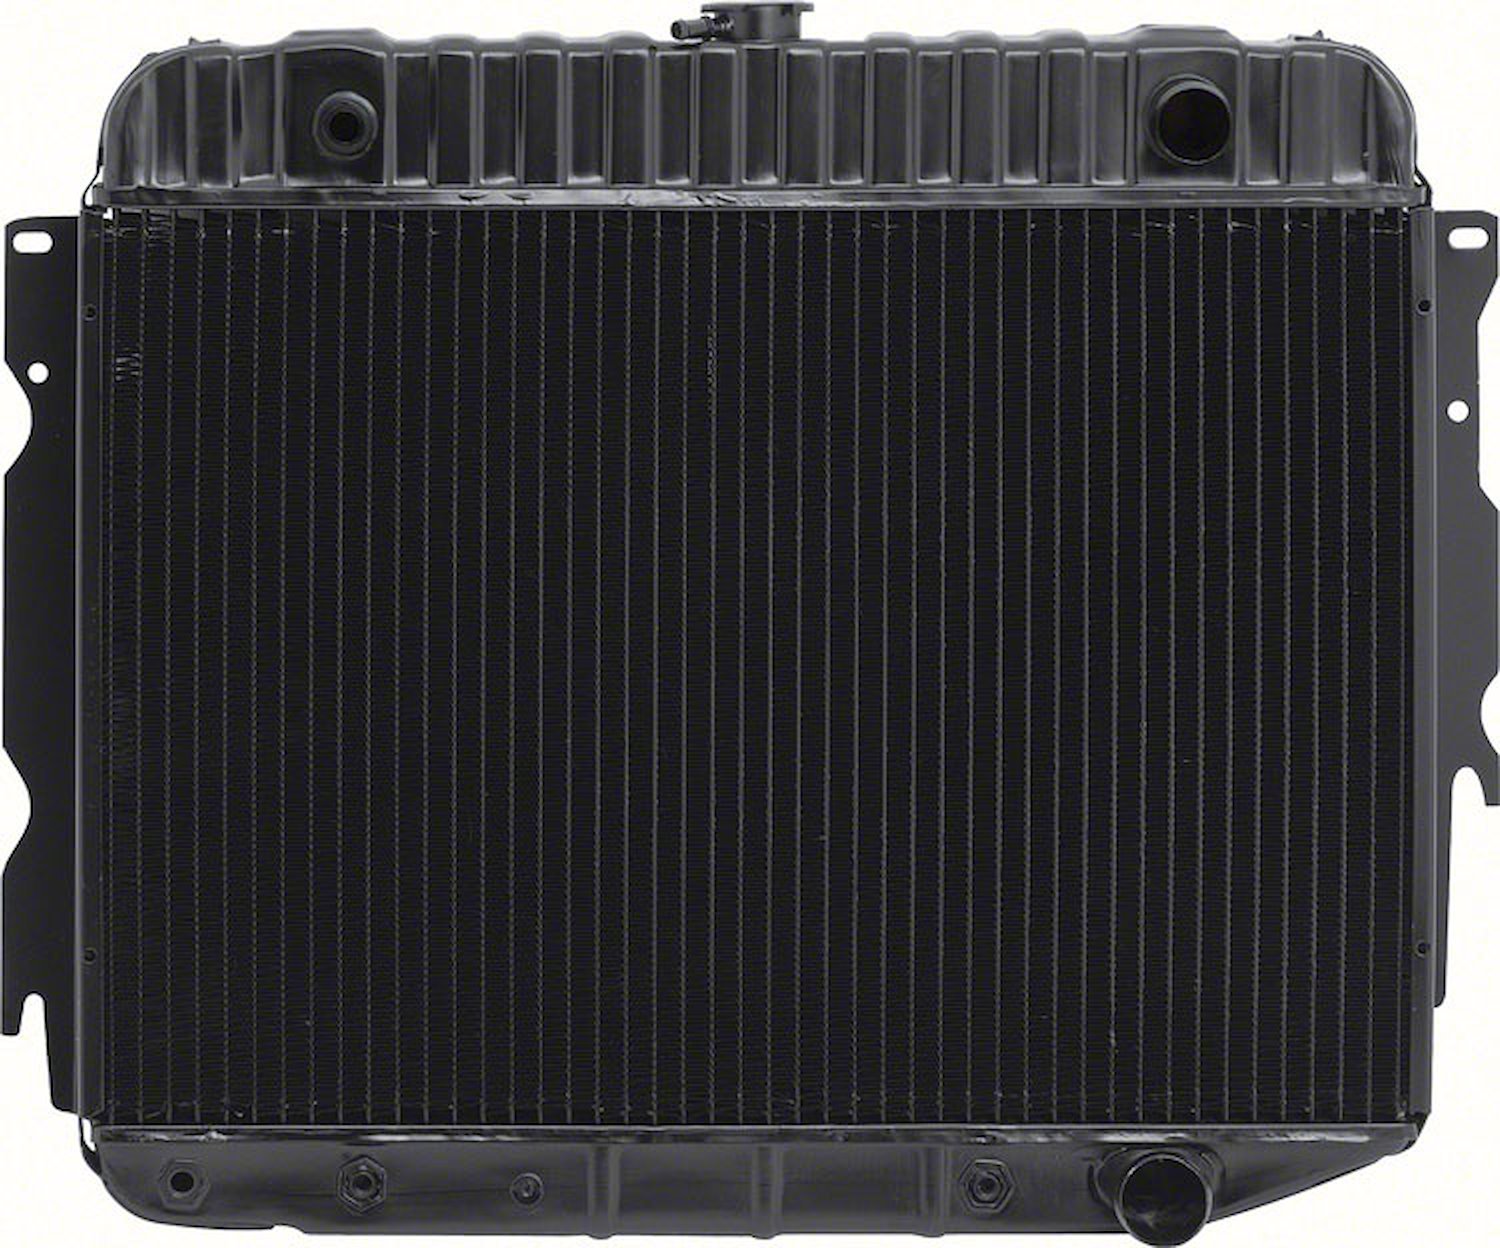 MD2301A Replacement Radiator 1973 Mopar B/E-Body Big Block V8 With Automatic Trans 4 Row 22" Wide